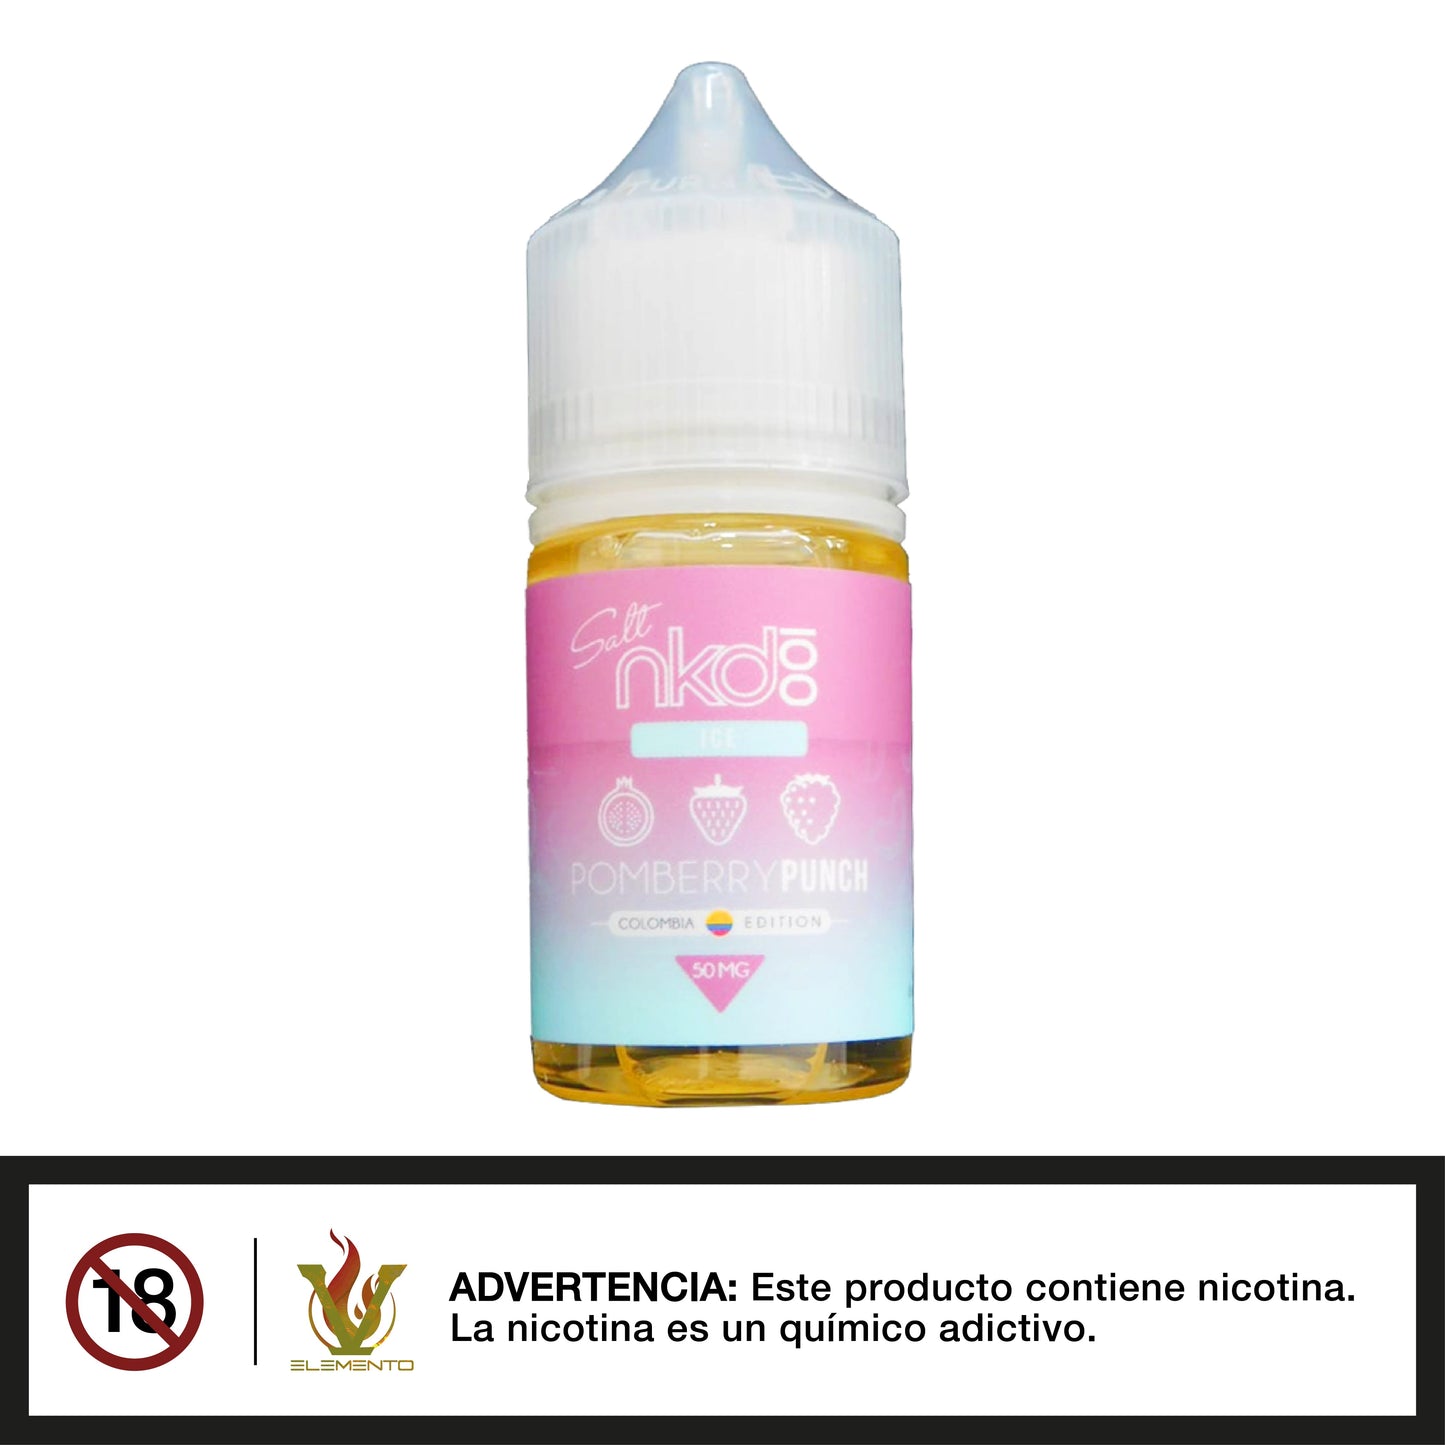 Naked 100 Colombia Edition Salt - Pomberry Punch 30ml - Quinto Elemento Vap